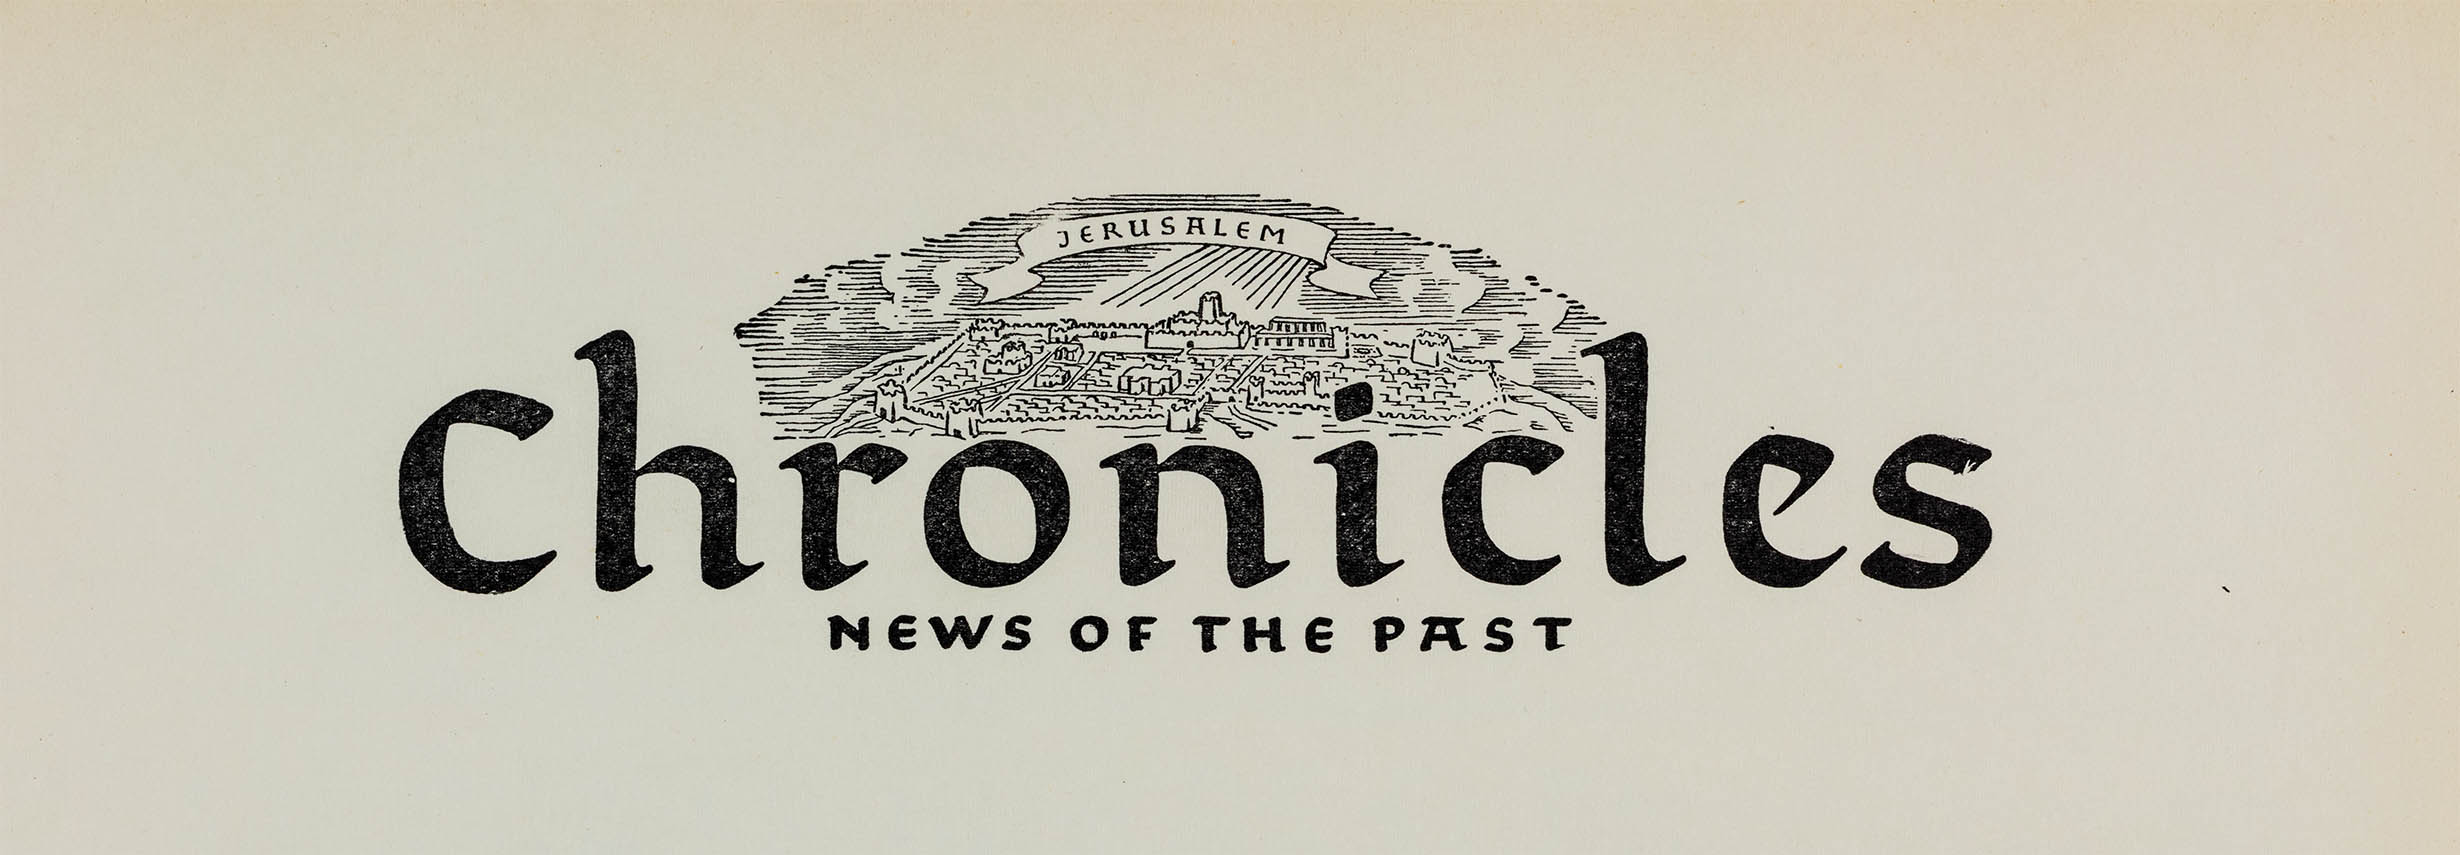 Masthead for Chronicles